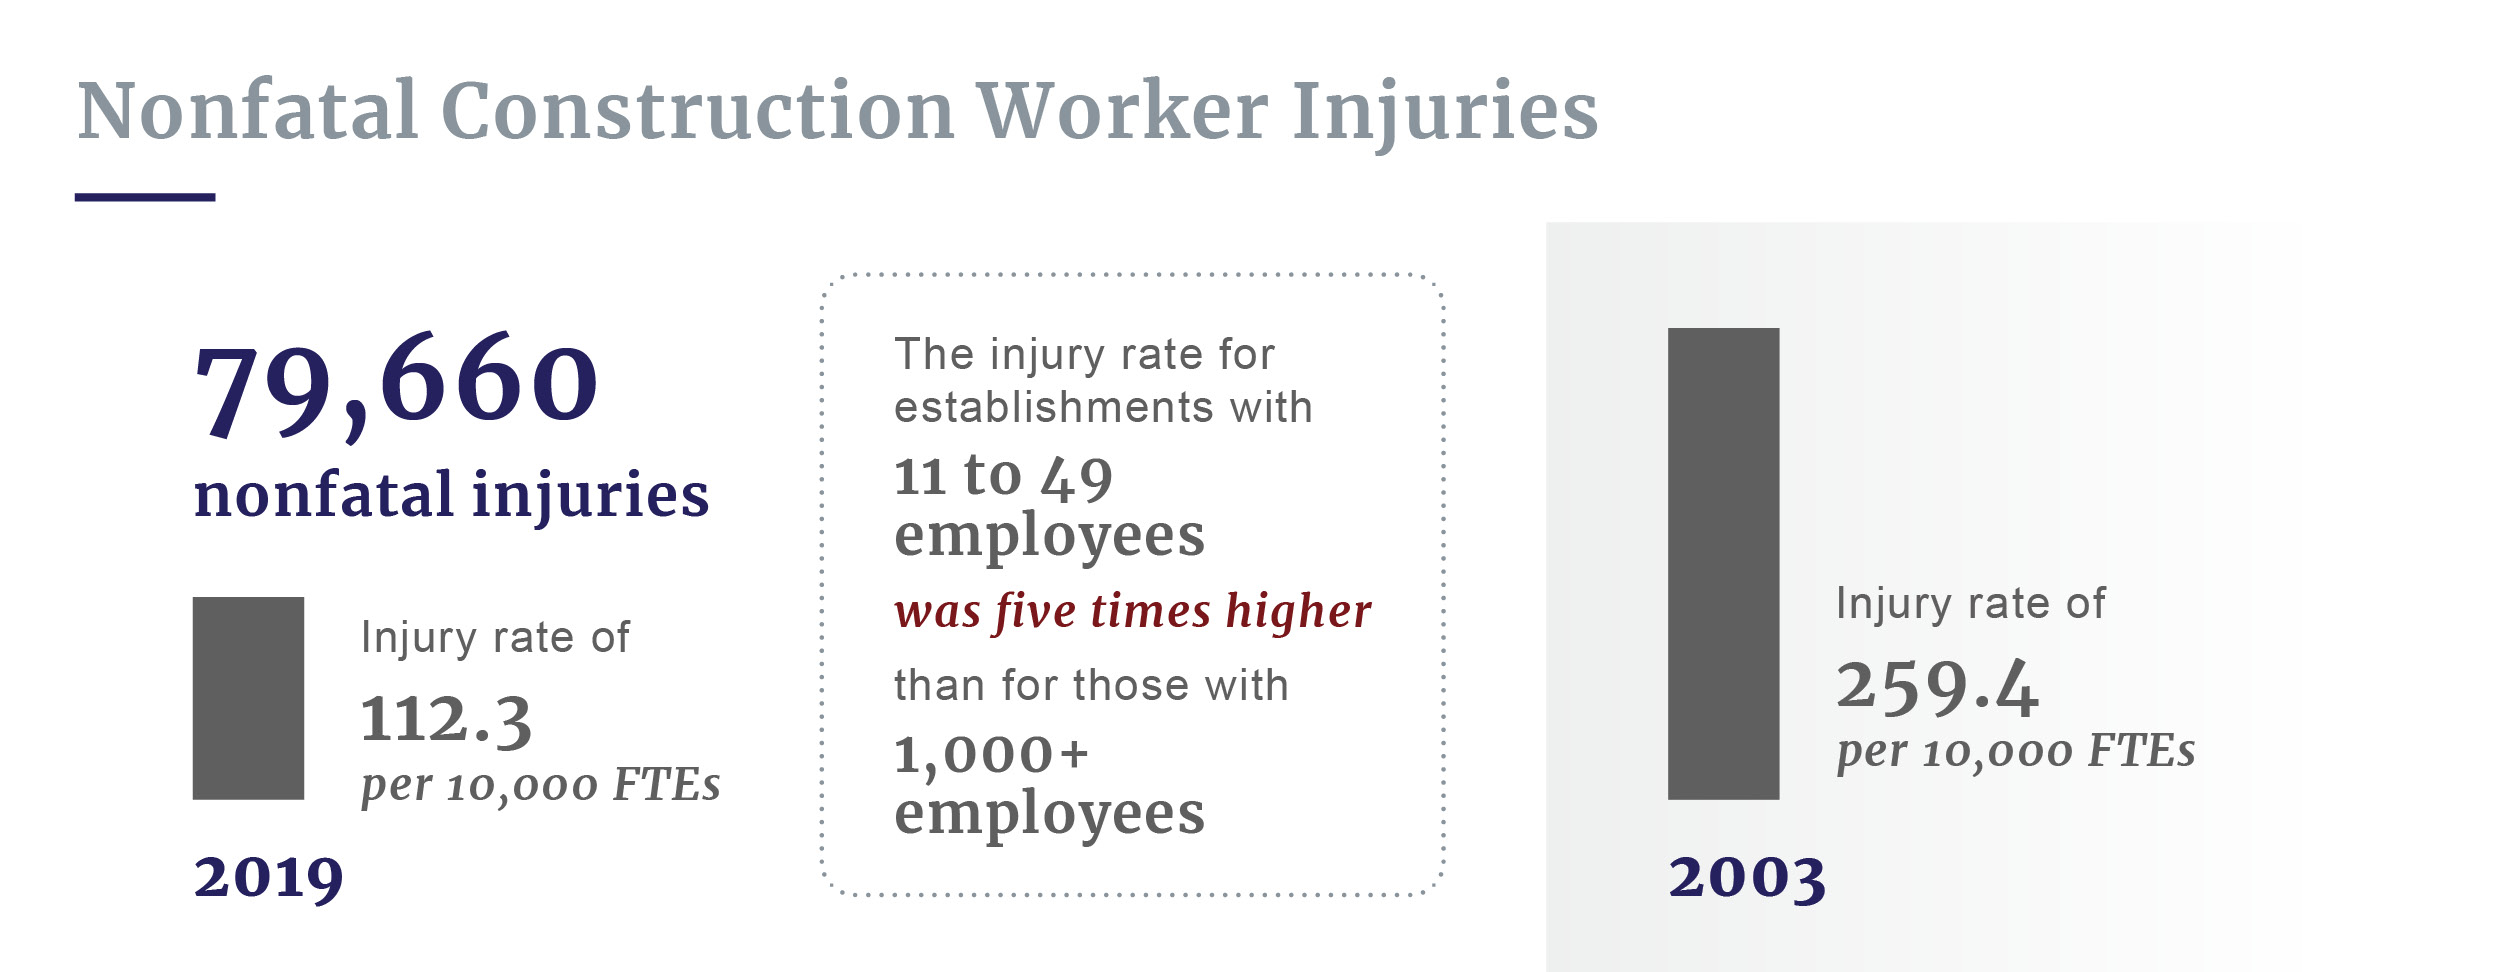 Nonfatal construction worker injuries